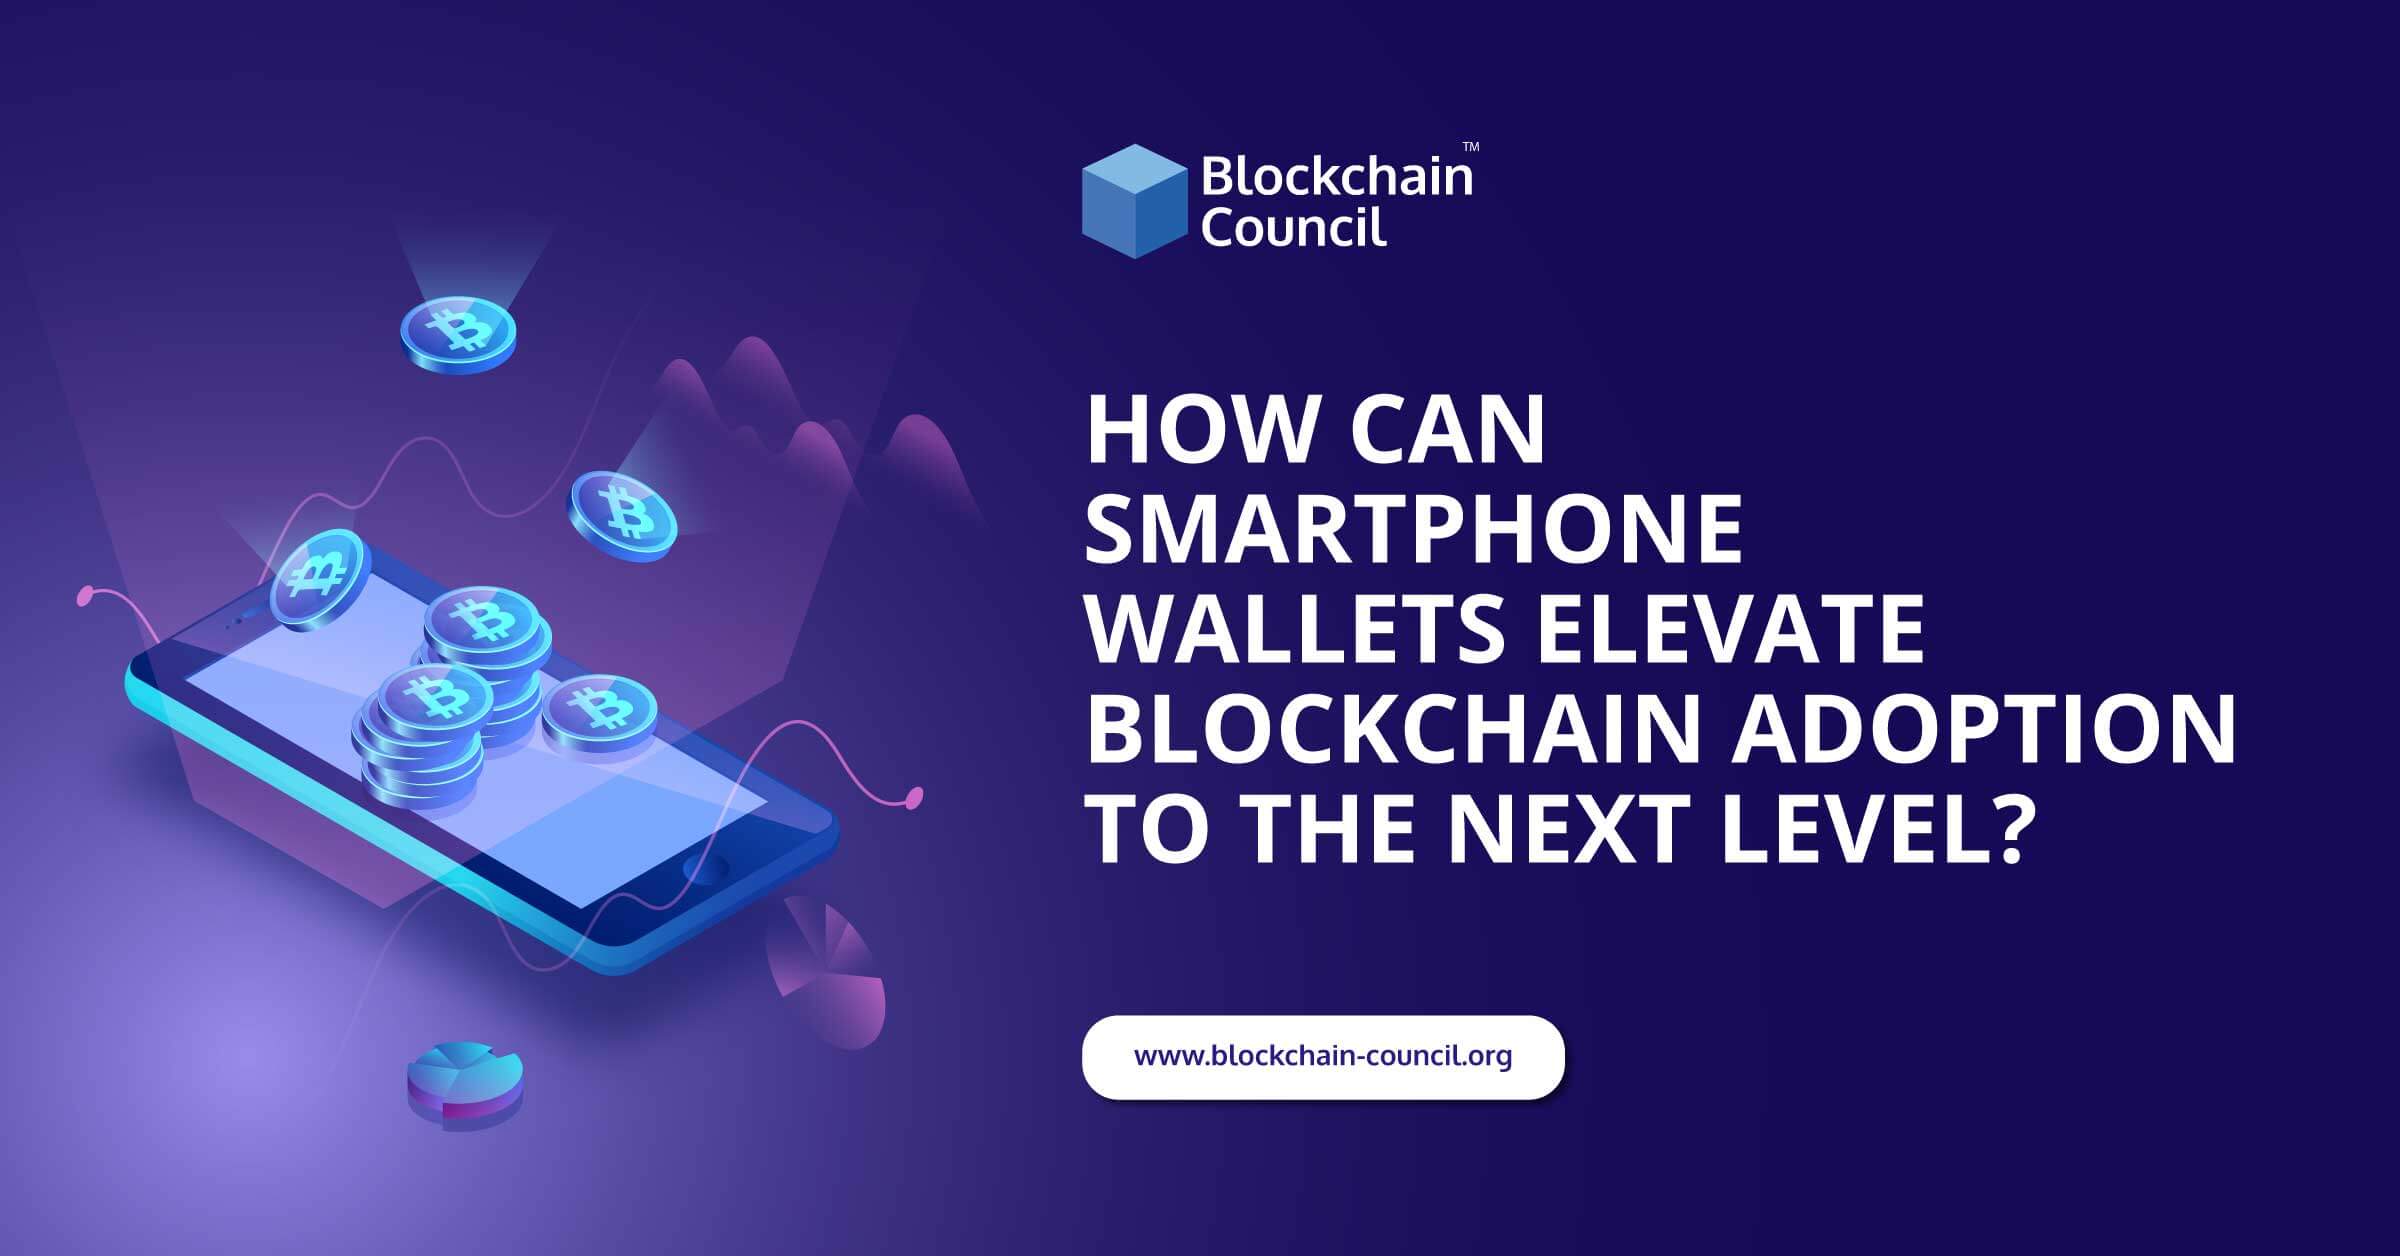 How-Can-Smartphone-Wallets-Elevate-Blockchain-Adoption-to-the-Next-Level